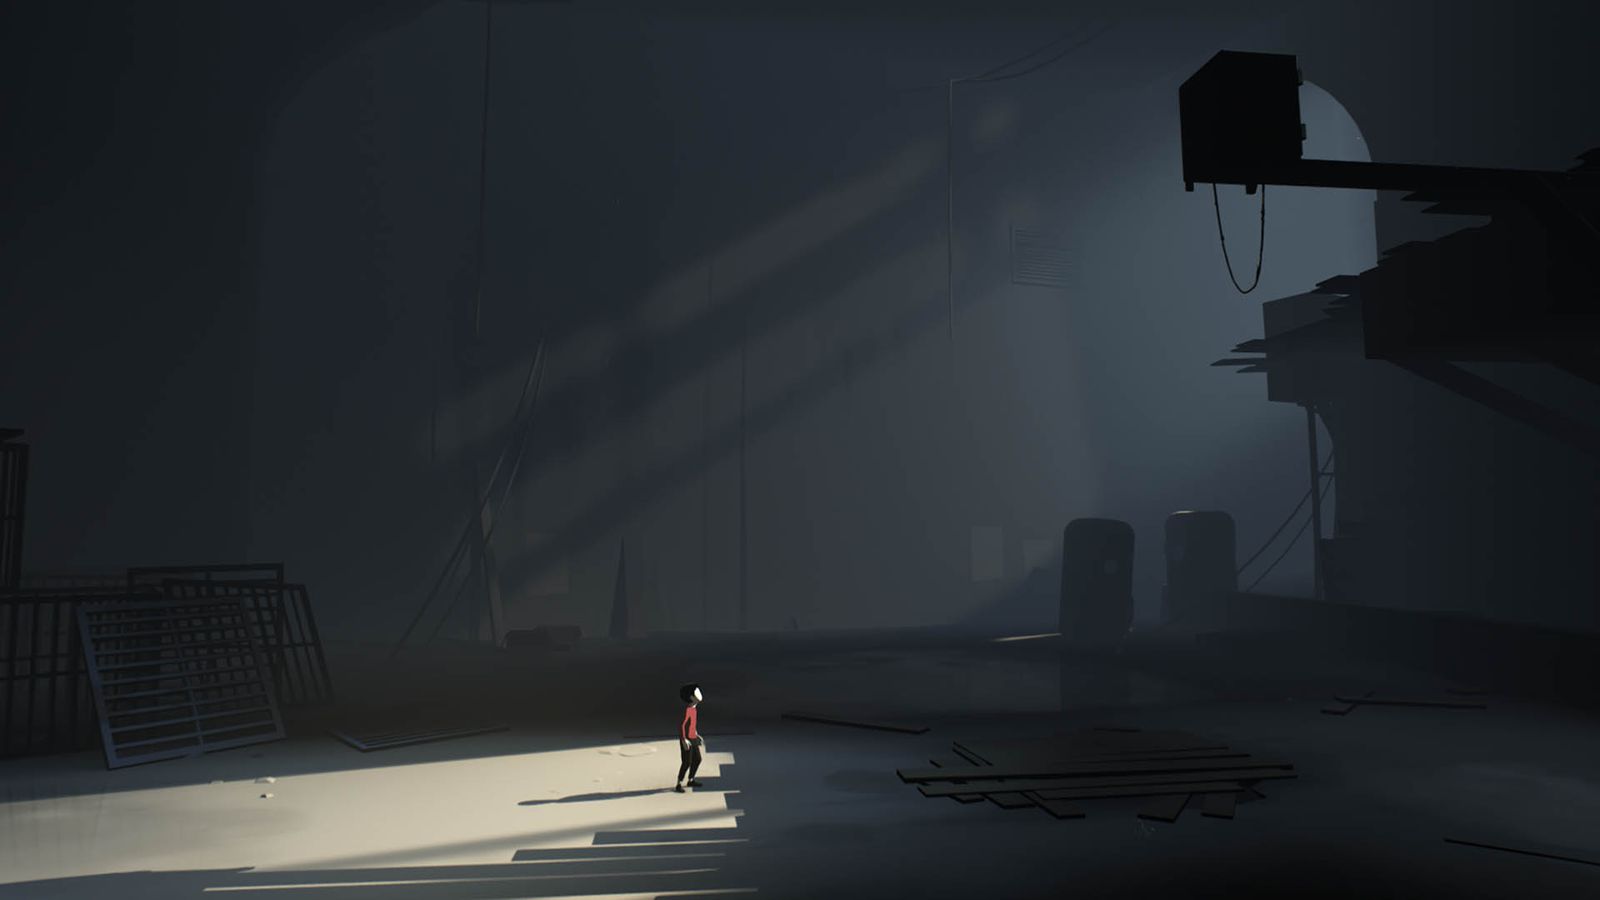 Image from the game Inside. A young boy in a red shirt looks up at a ledge in an industrial environment, upon which is perched a metal safe.